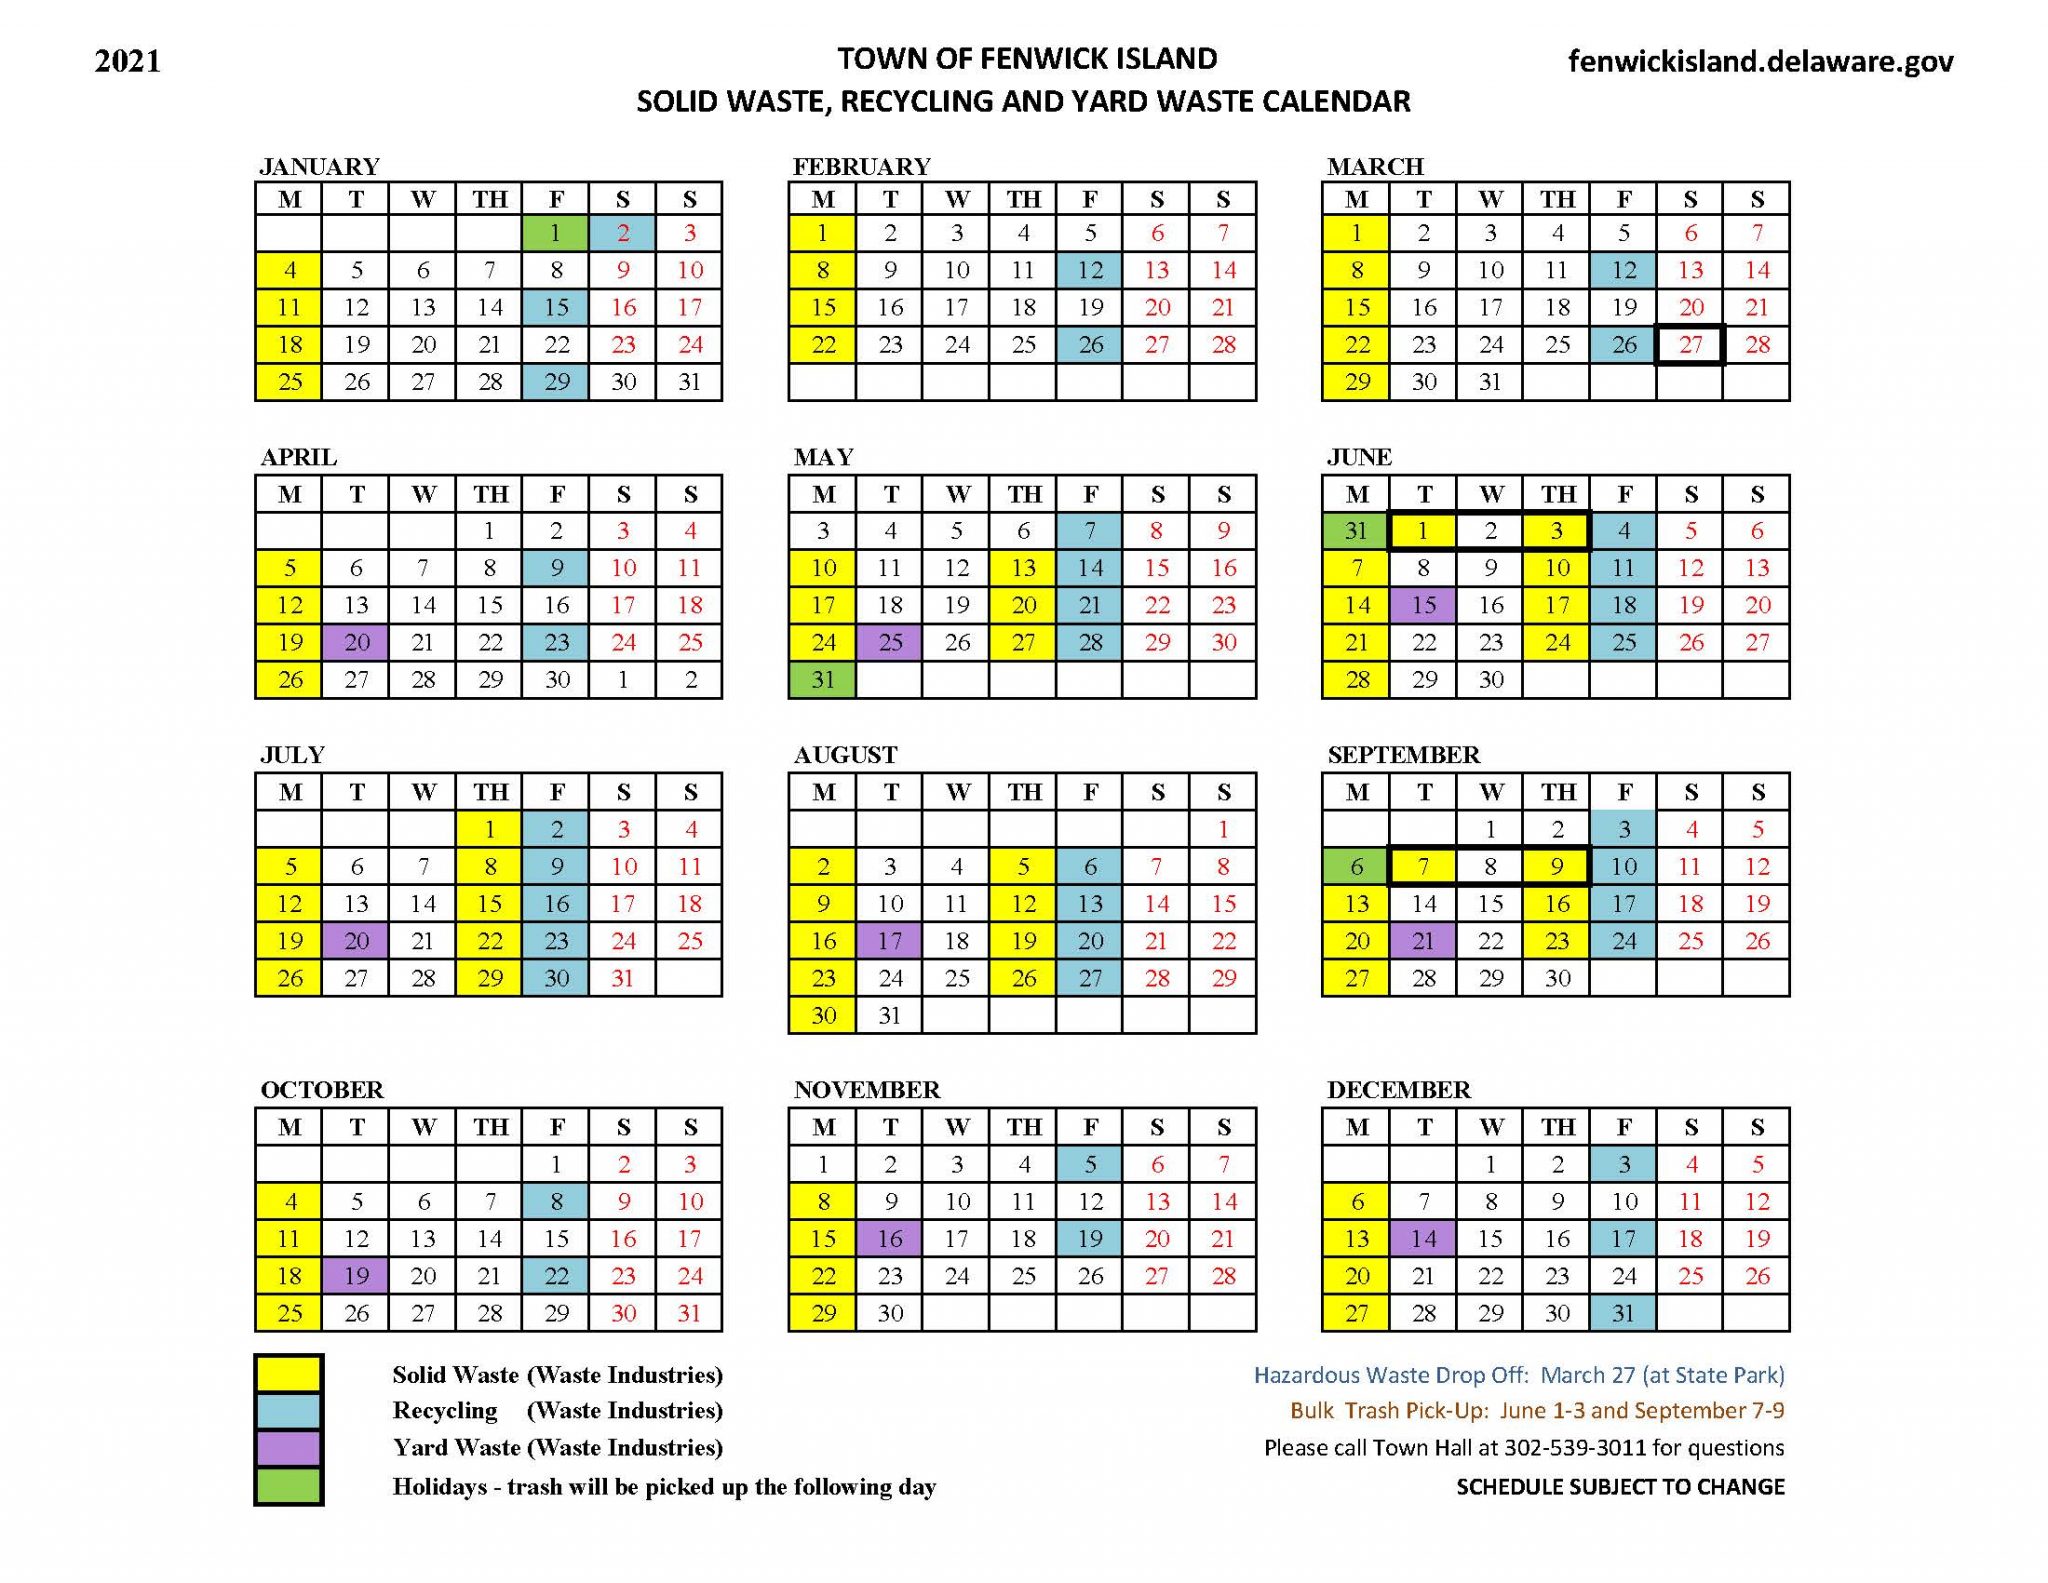 2021 Solid Waste, Recycling and Yard Waste Calendar - Fenwick Island - Sussex County, Delaware